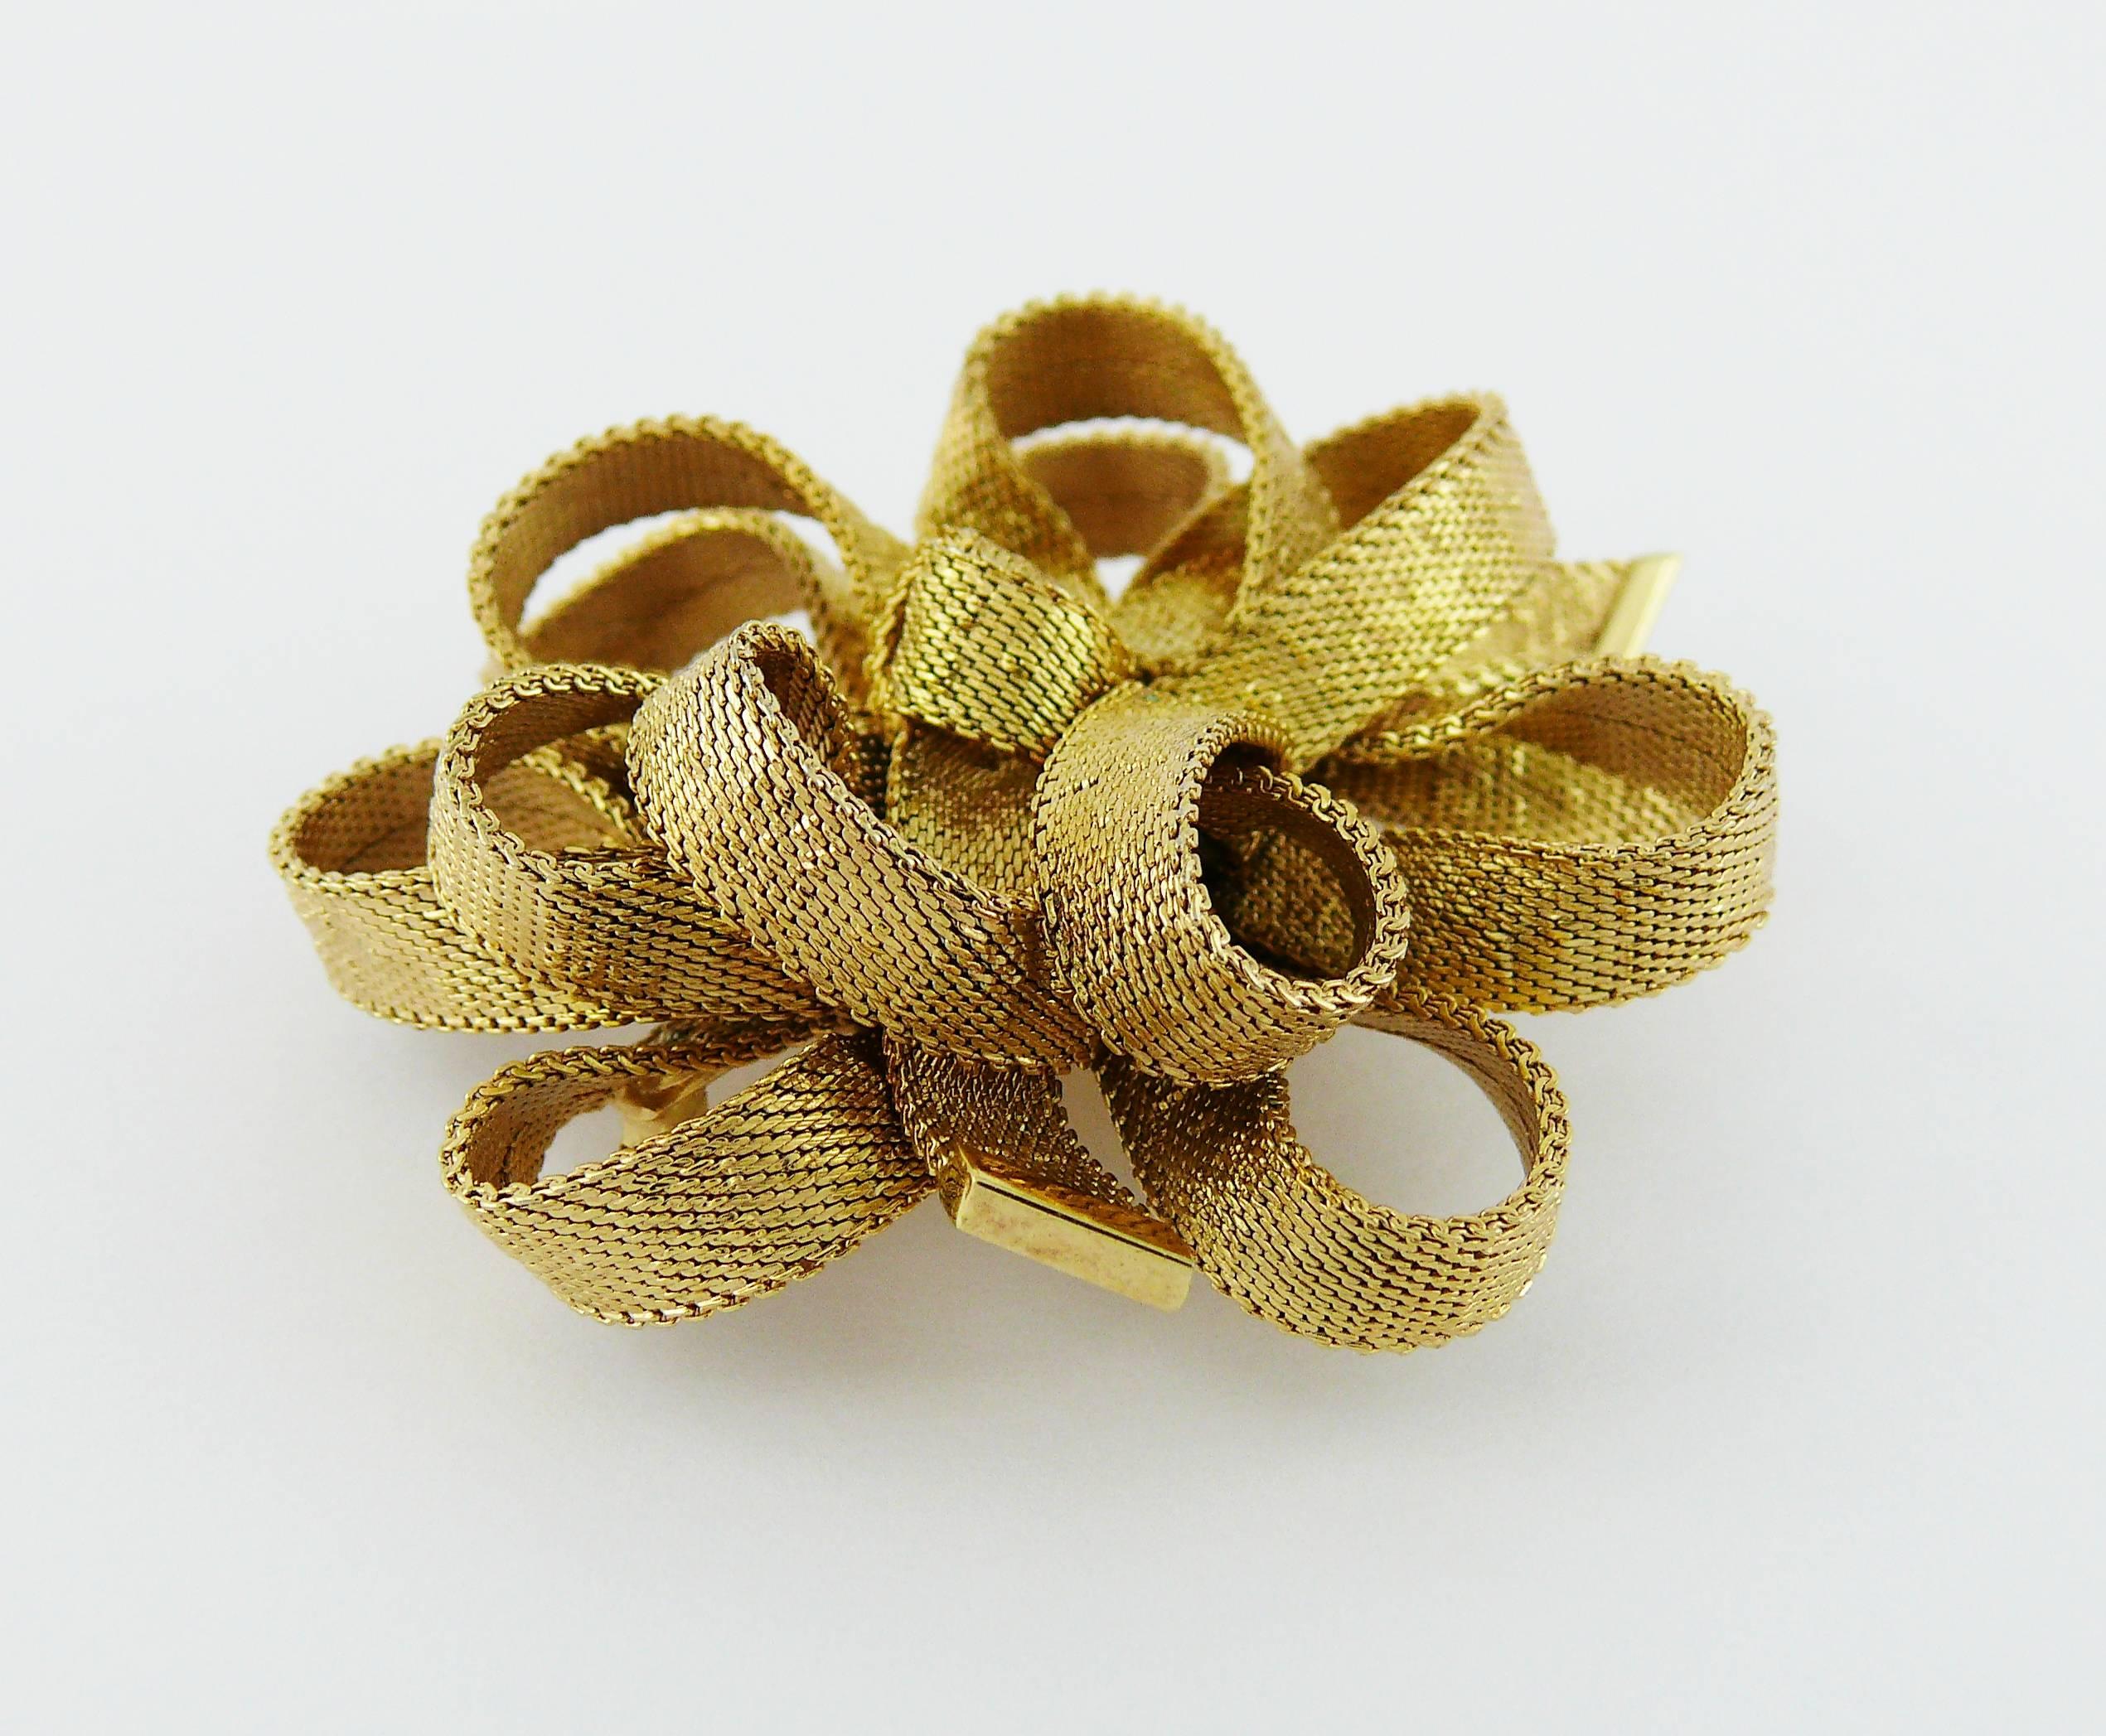 CHRISTIAN DIOR vintage gorgeous gold toned 3-dimensional ribbon bow brooch, dated 1964.

This brooch features a braided flexible chain that perfectly mimics a ribbon.

Marked 19 CHR. DIOR 64 Germany.

Indicative measurements : width approx 5.5 cm